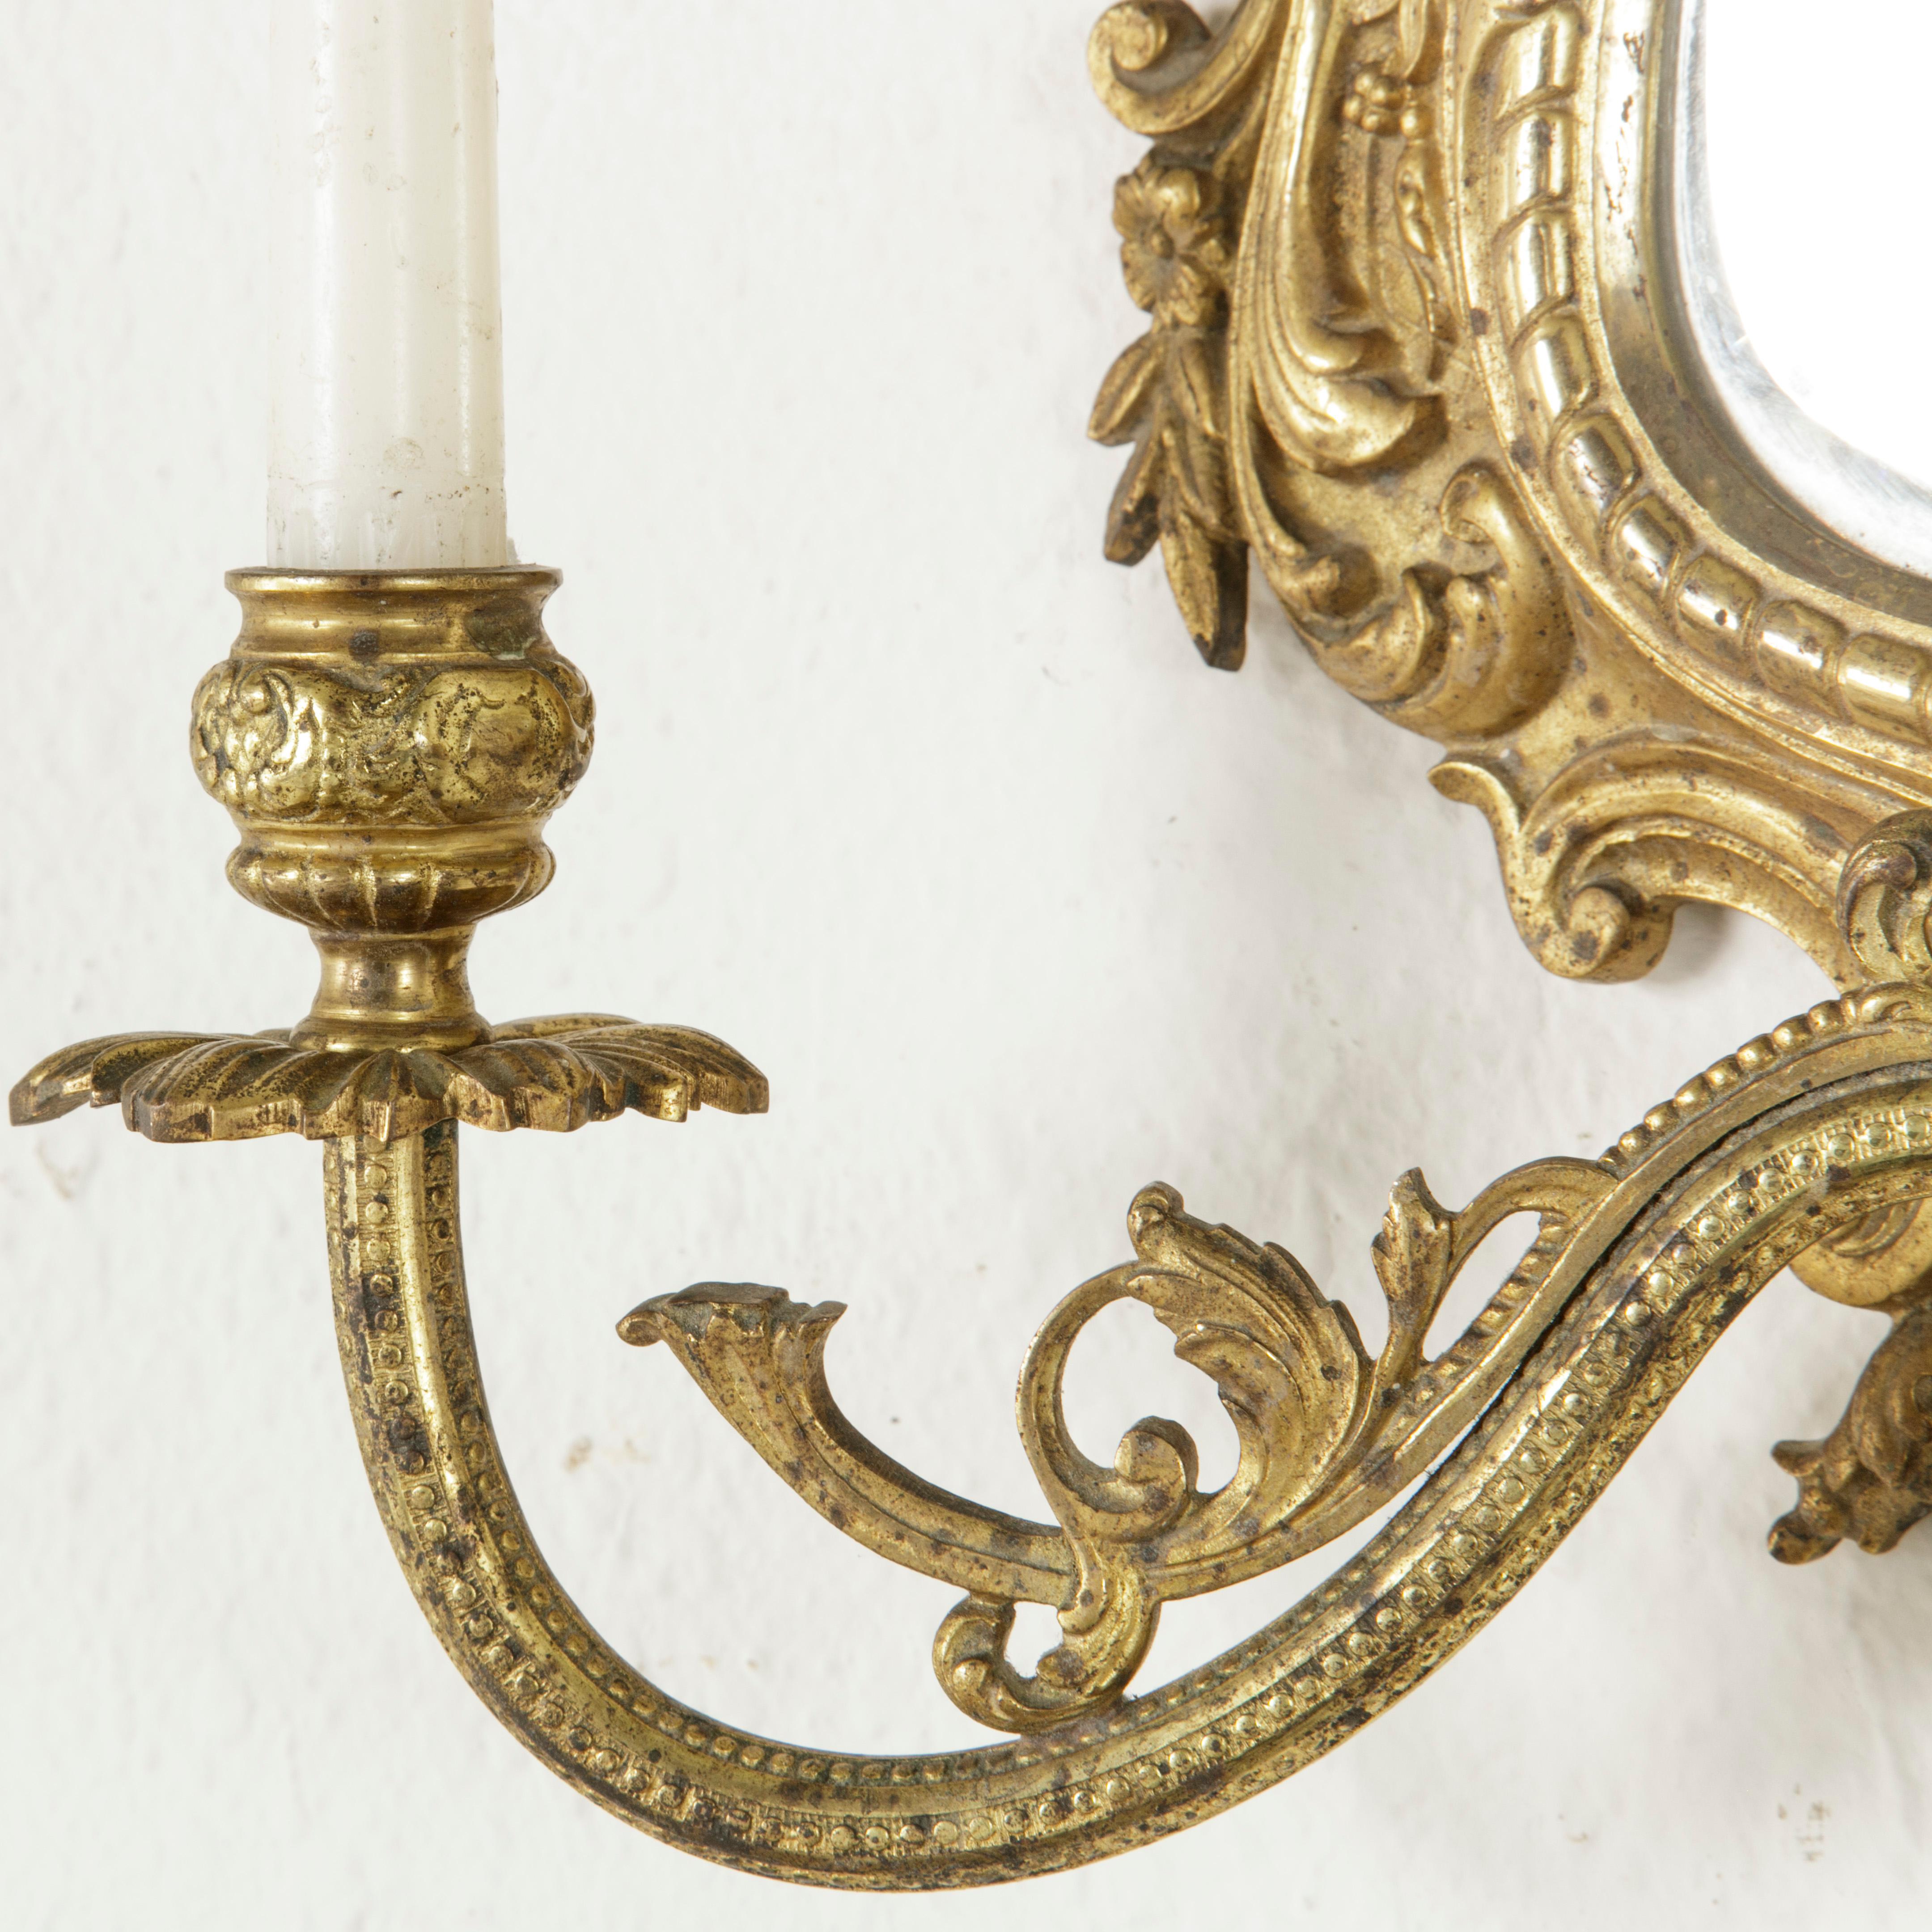 Late 19th Century French Gilt Bronze Girondole Wall Mirror Sconce, Beveled Glass 6